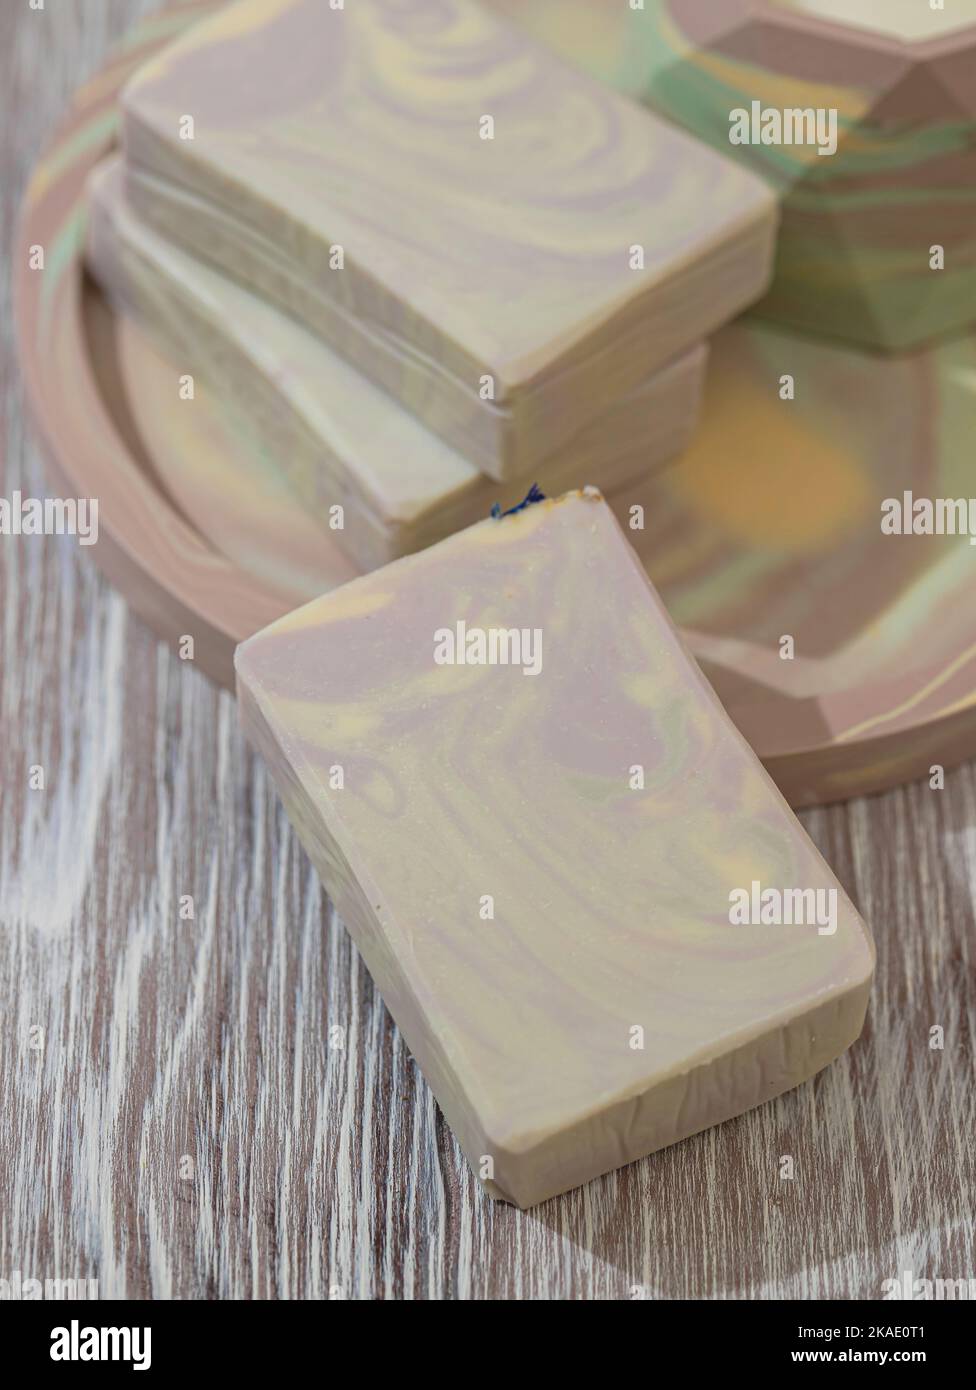 Organic homemade herbal natural soap. Concept of home natural organic skin care. Spa treatments. Selective focus Stock Photo